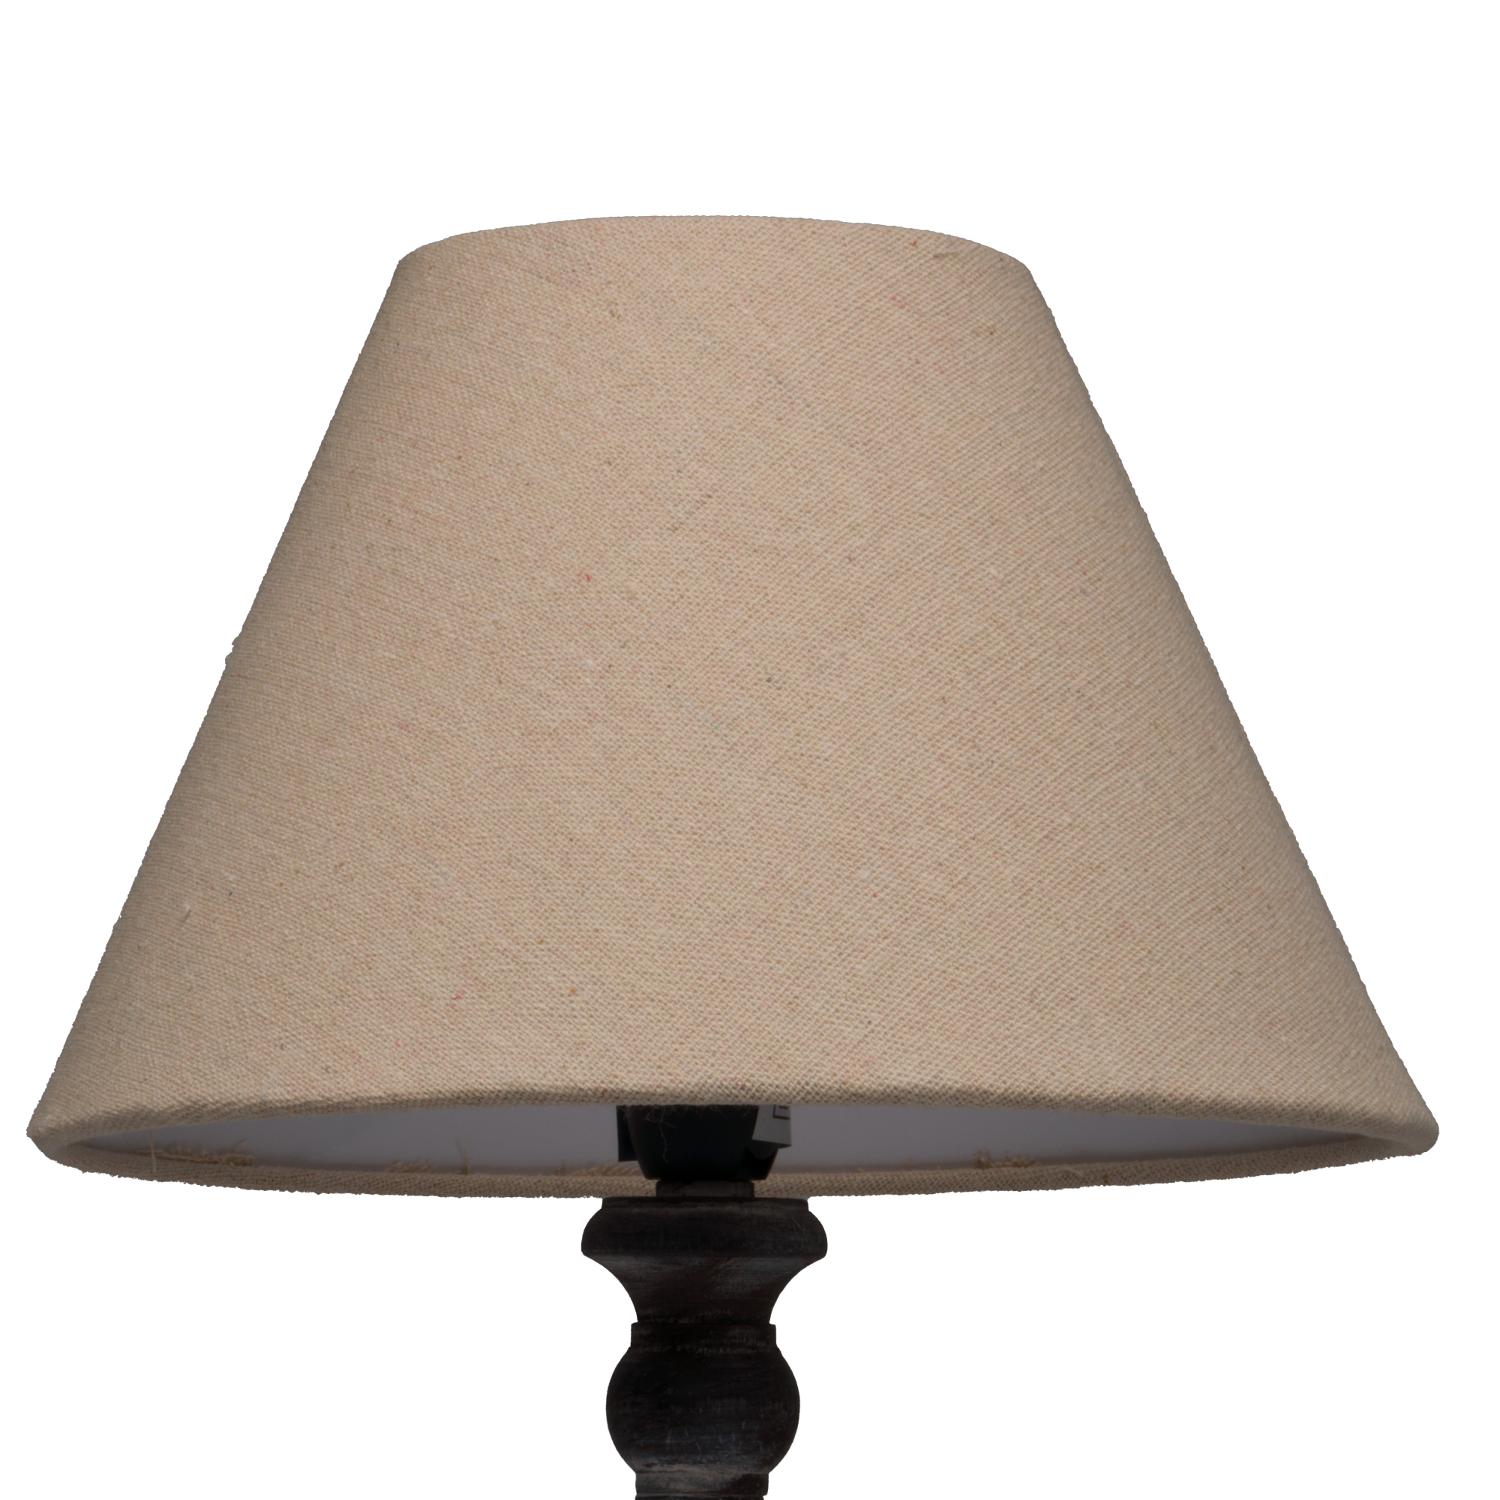 incia-stem-table-lamp_21285-a fabric from JLP